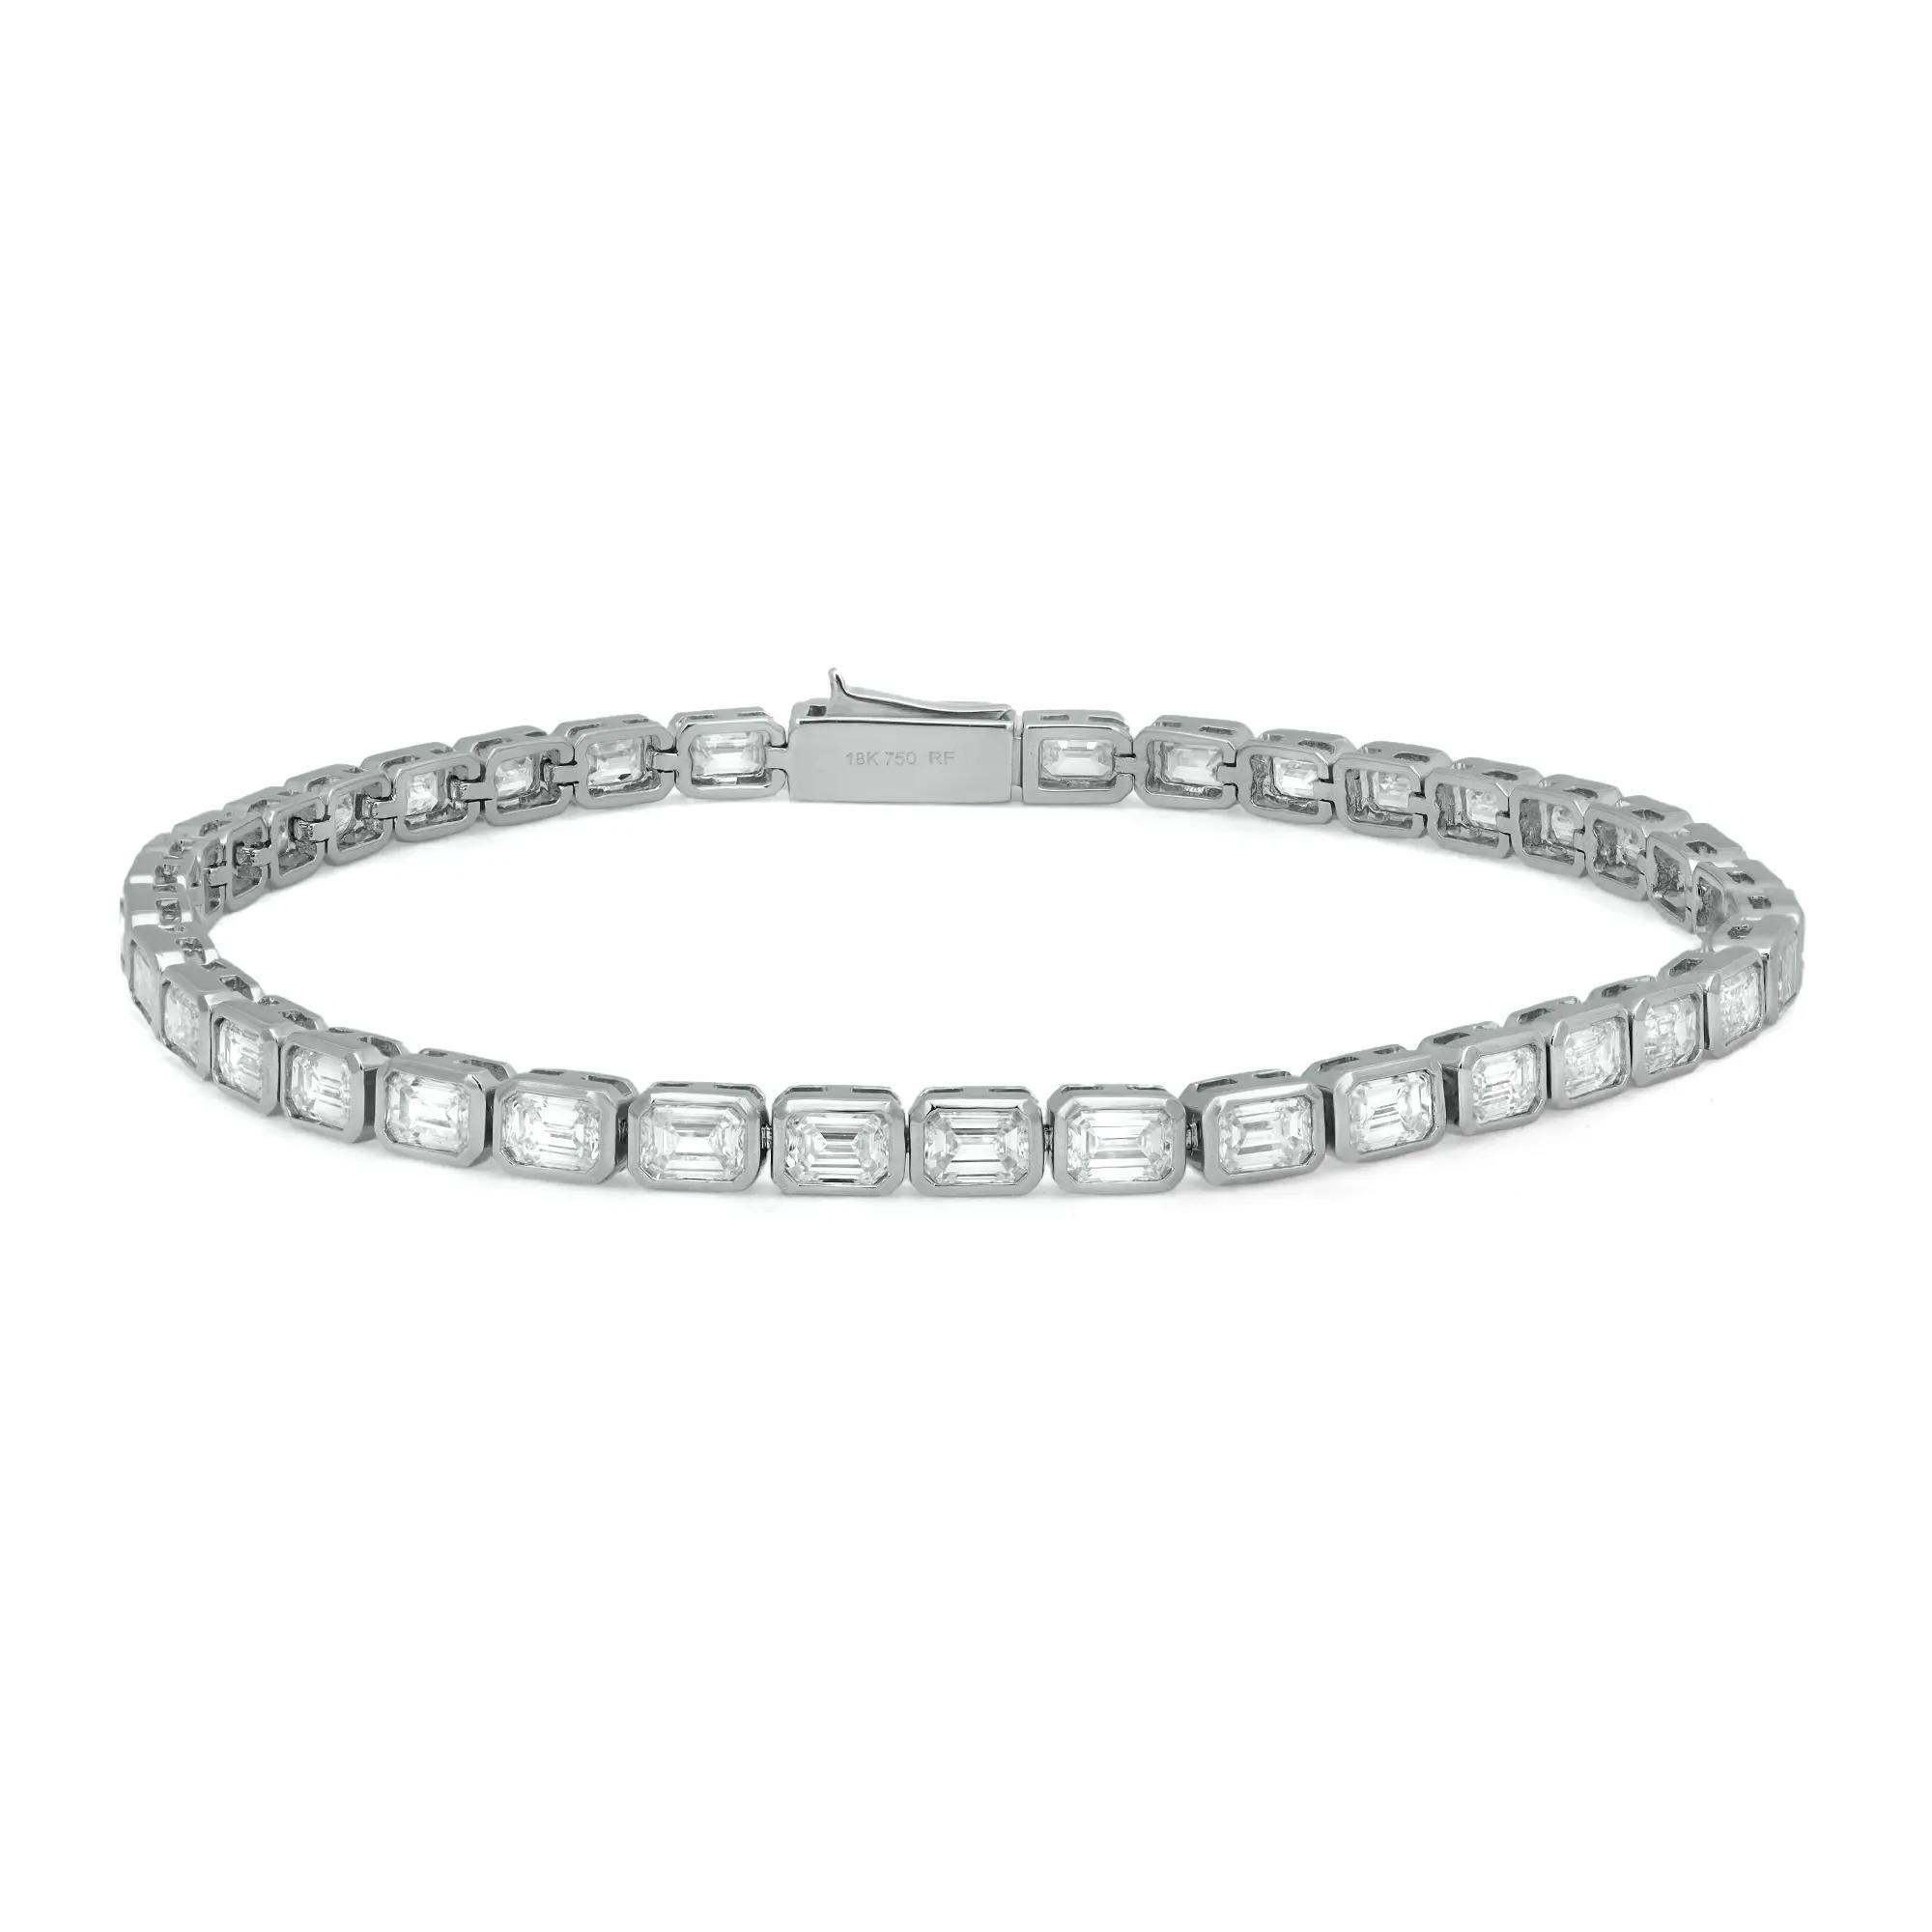 5.48 Carat Emerald Cut Diamond East-West Bezel Tennis Bracelet 18K White Gold  In New Condition For Sale In New York, NY